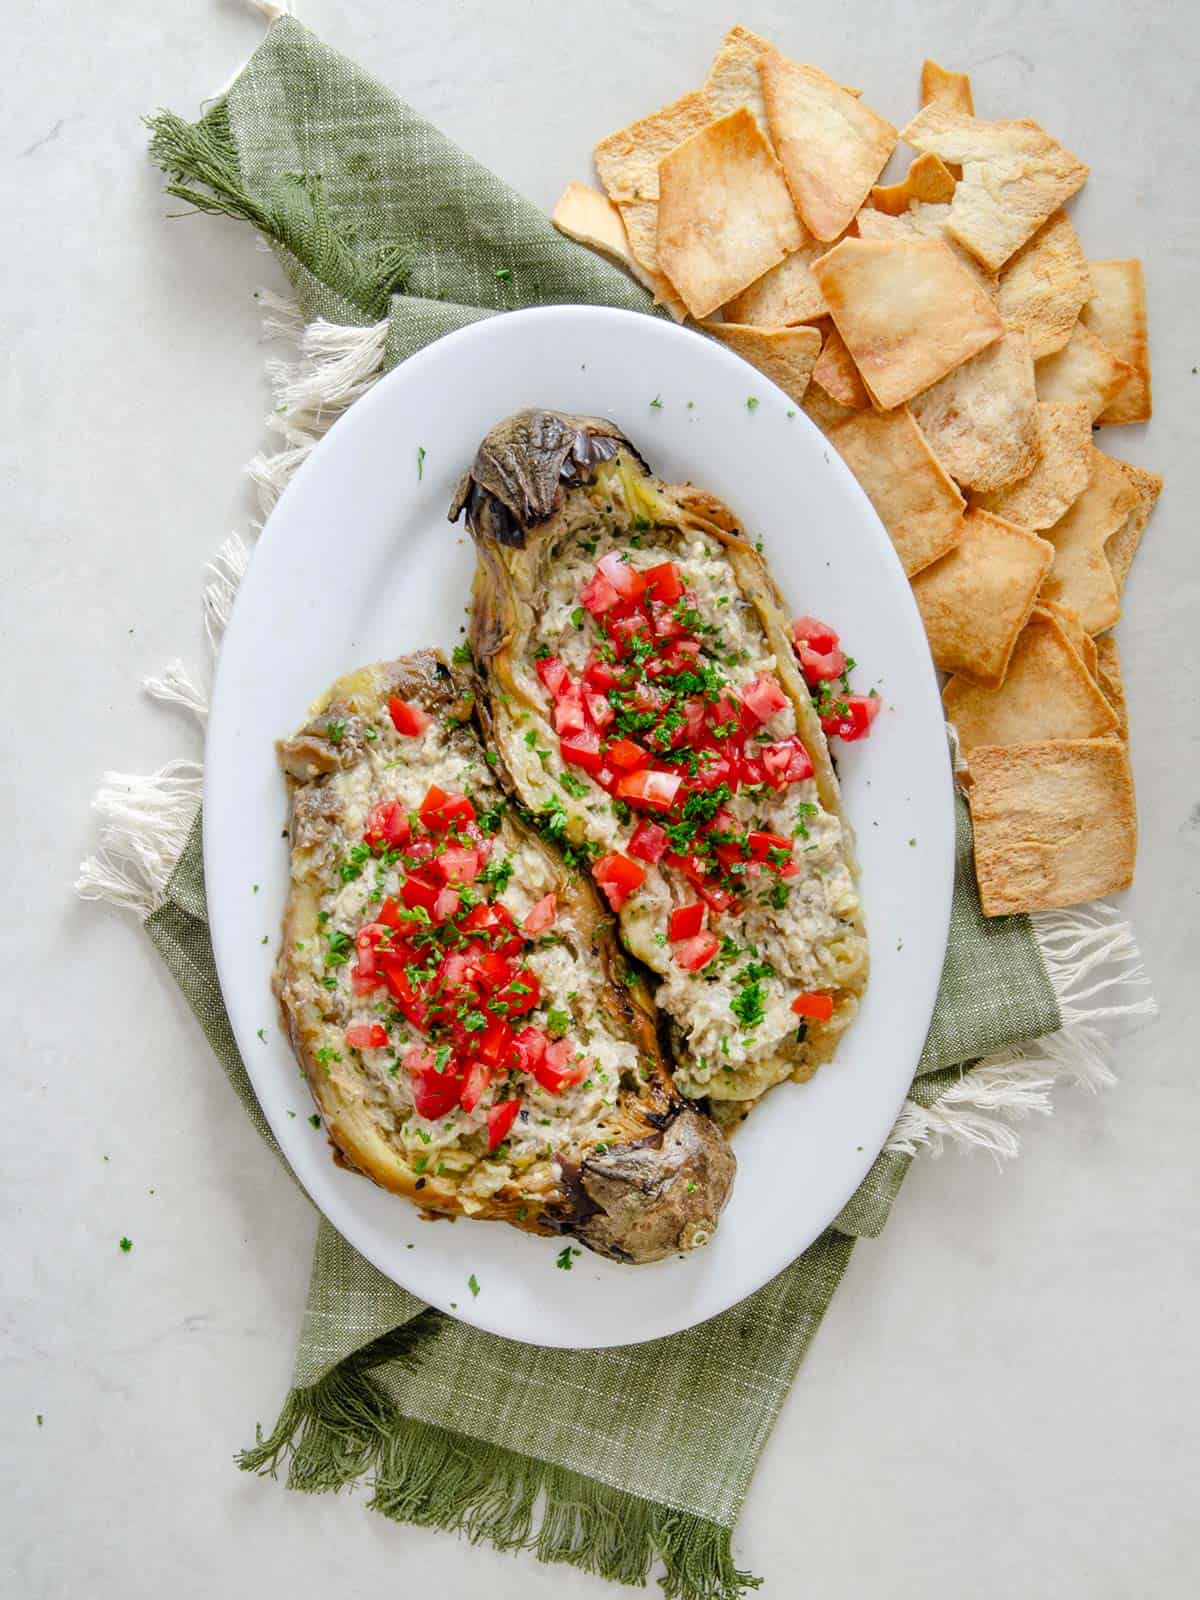 Eggplant dip topped with diced tomatoes and parsley with a side of crackers.